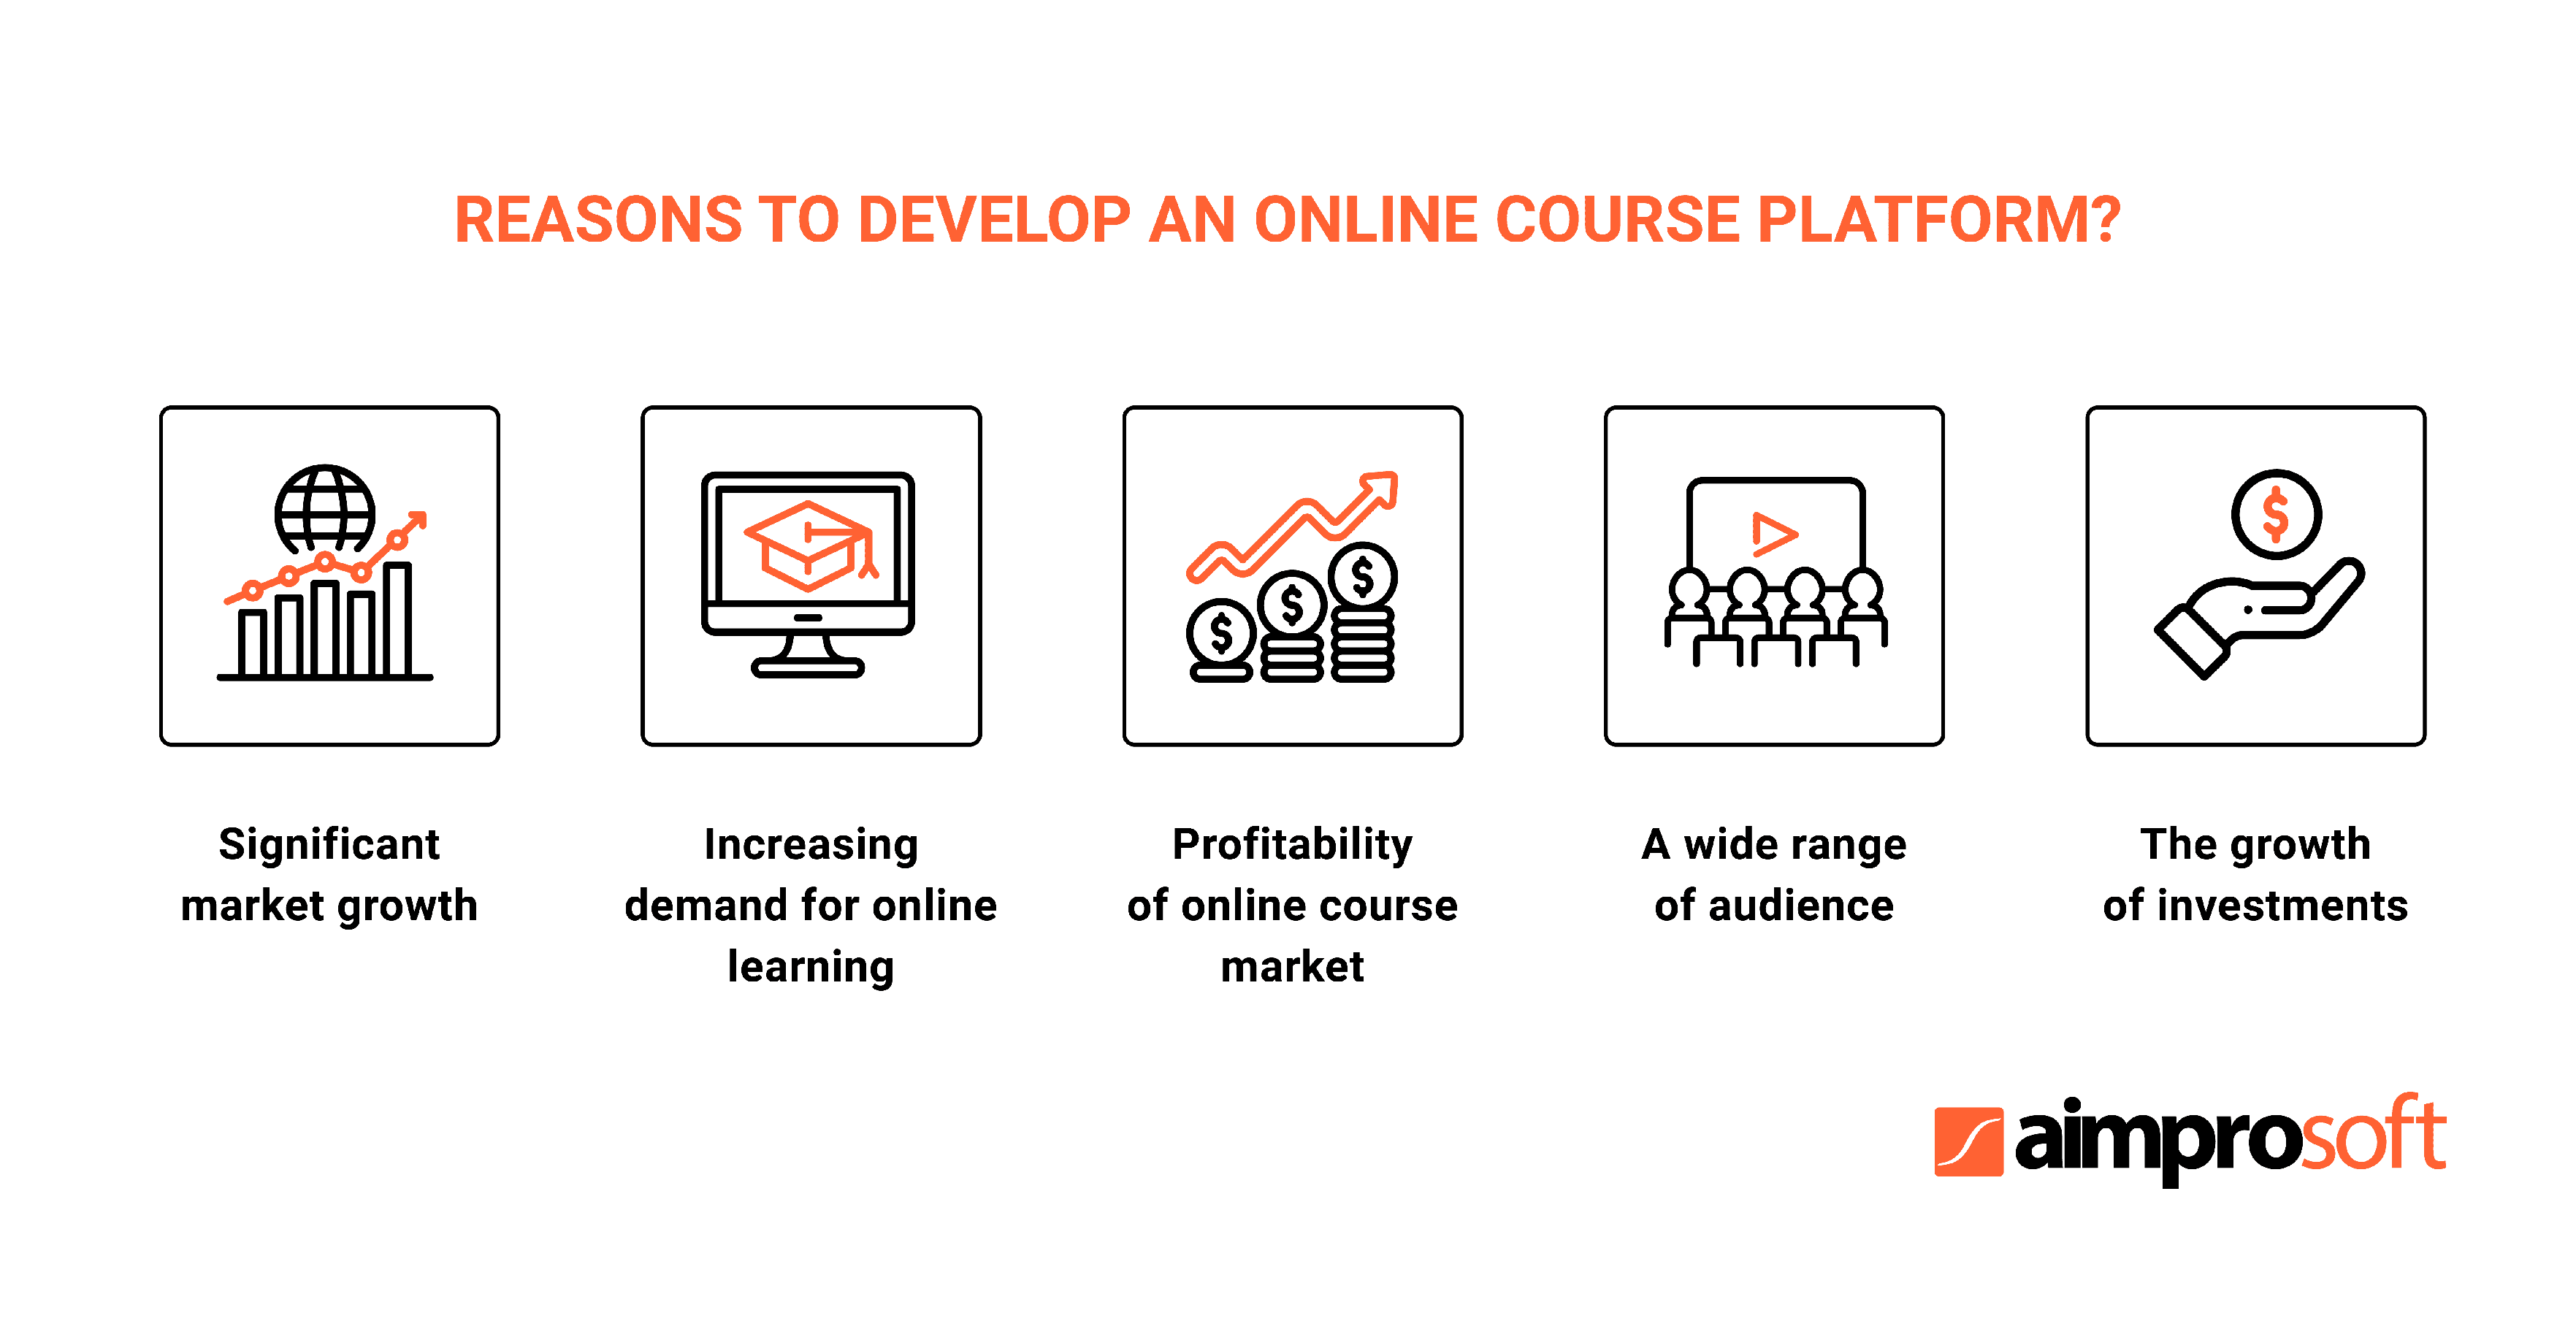 Reasons to develop an online course platform like Udemy